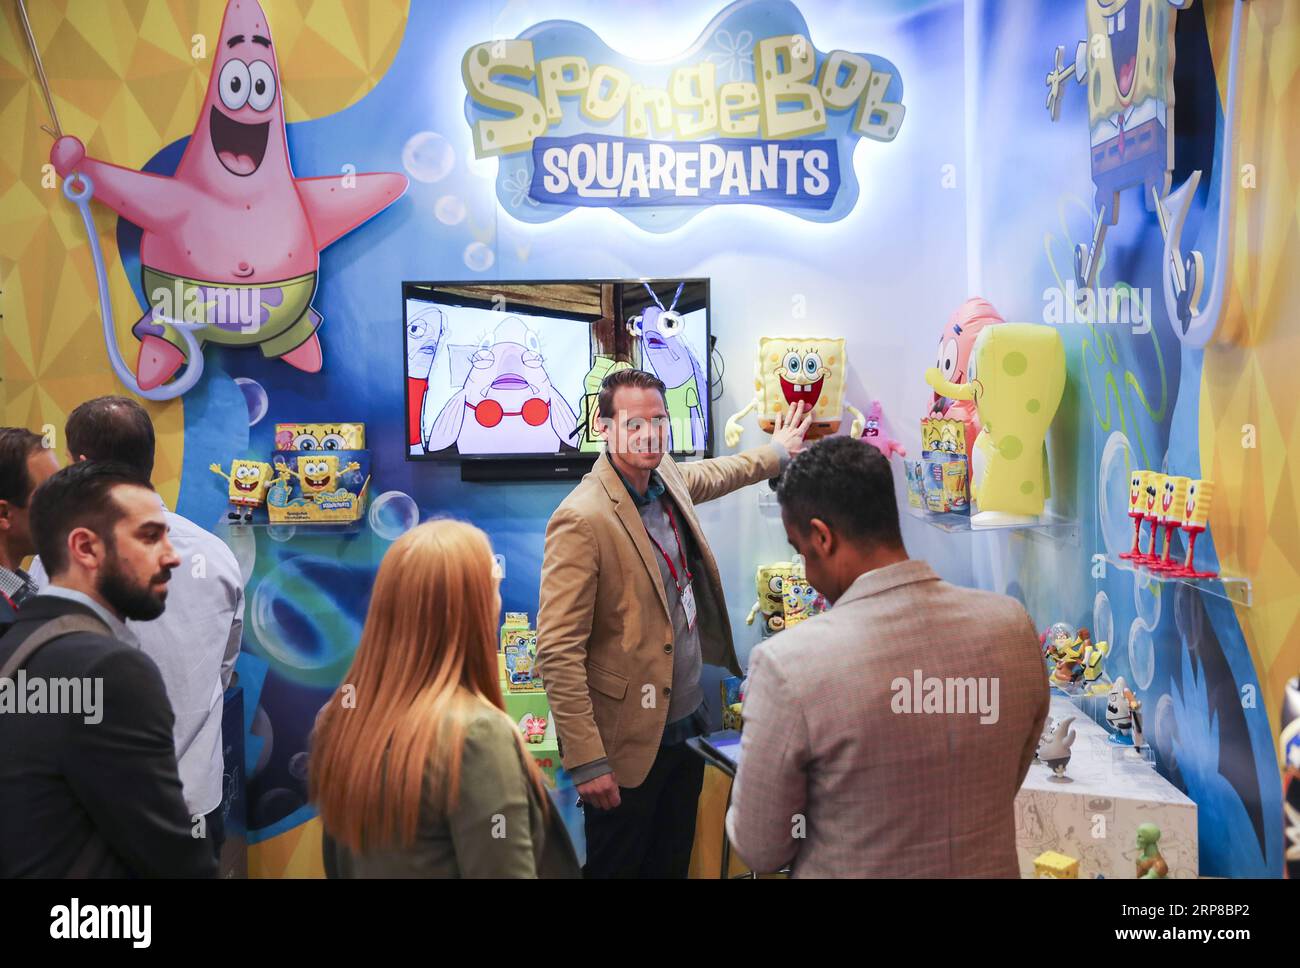 (190226) -- BEIJING, Feb. 26, 2019 -- Visitors look at toy products of SpongeBob SquarePants at the booth of Alpha Group Co., Ltd., a major animation, toy and entertainment player from south China s Guangdong Province, during the 116th Annual North American International Toy Fair at the Jacob K. Javits Convention Center in New York, the United States, on Feb. 19, 2019. ) Xinhua headlines: More fun toys, no painful tariffs: American toymakers hopeful on U.S.-China trade deal WangxYing PUBLICATIONxNOTxINxCHN Stock Photo